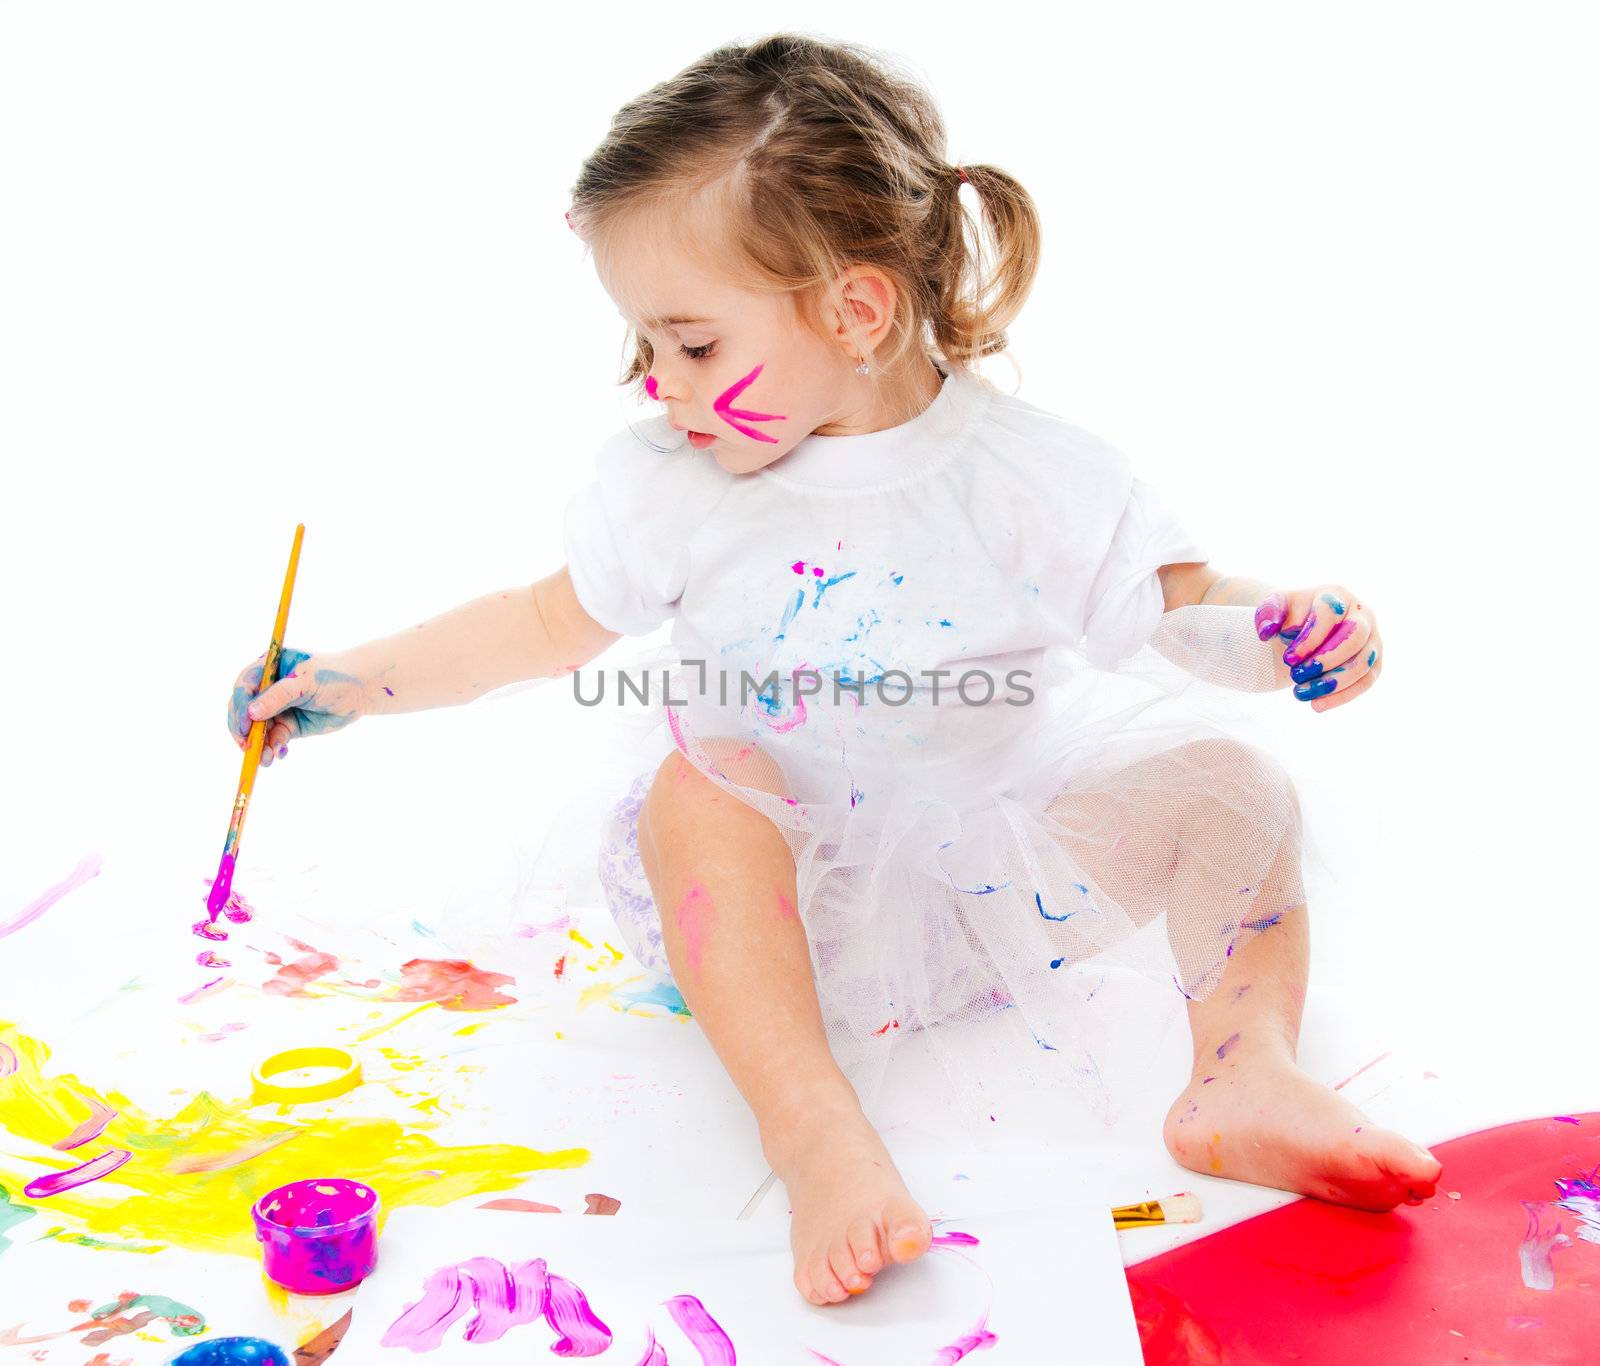 cute little girl with a brush and paints